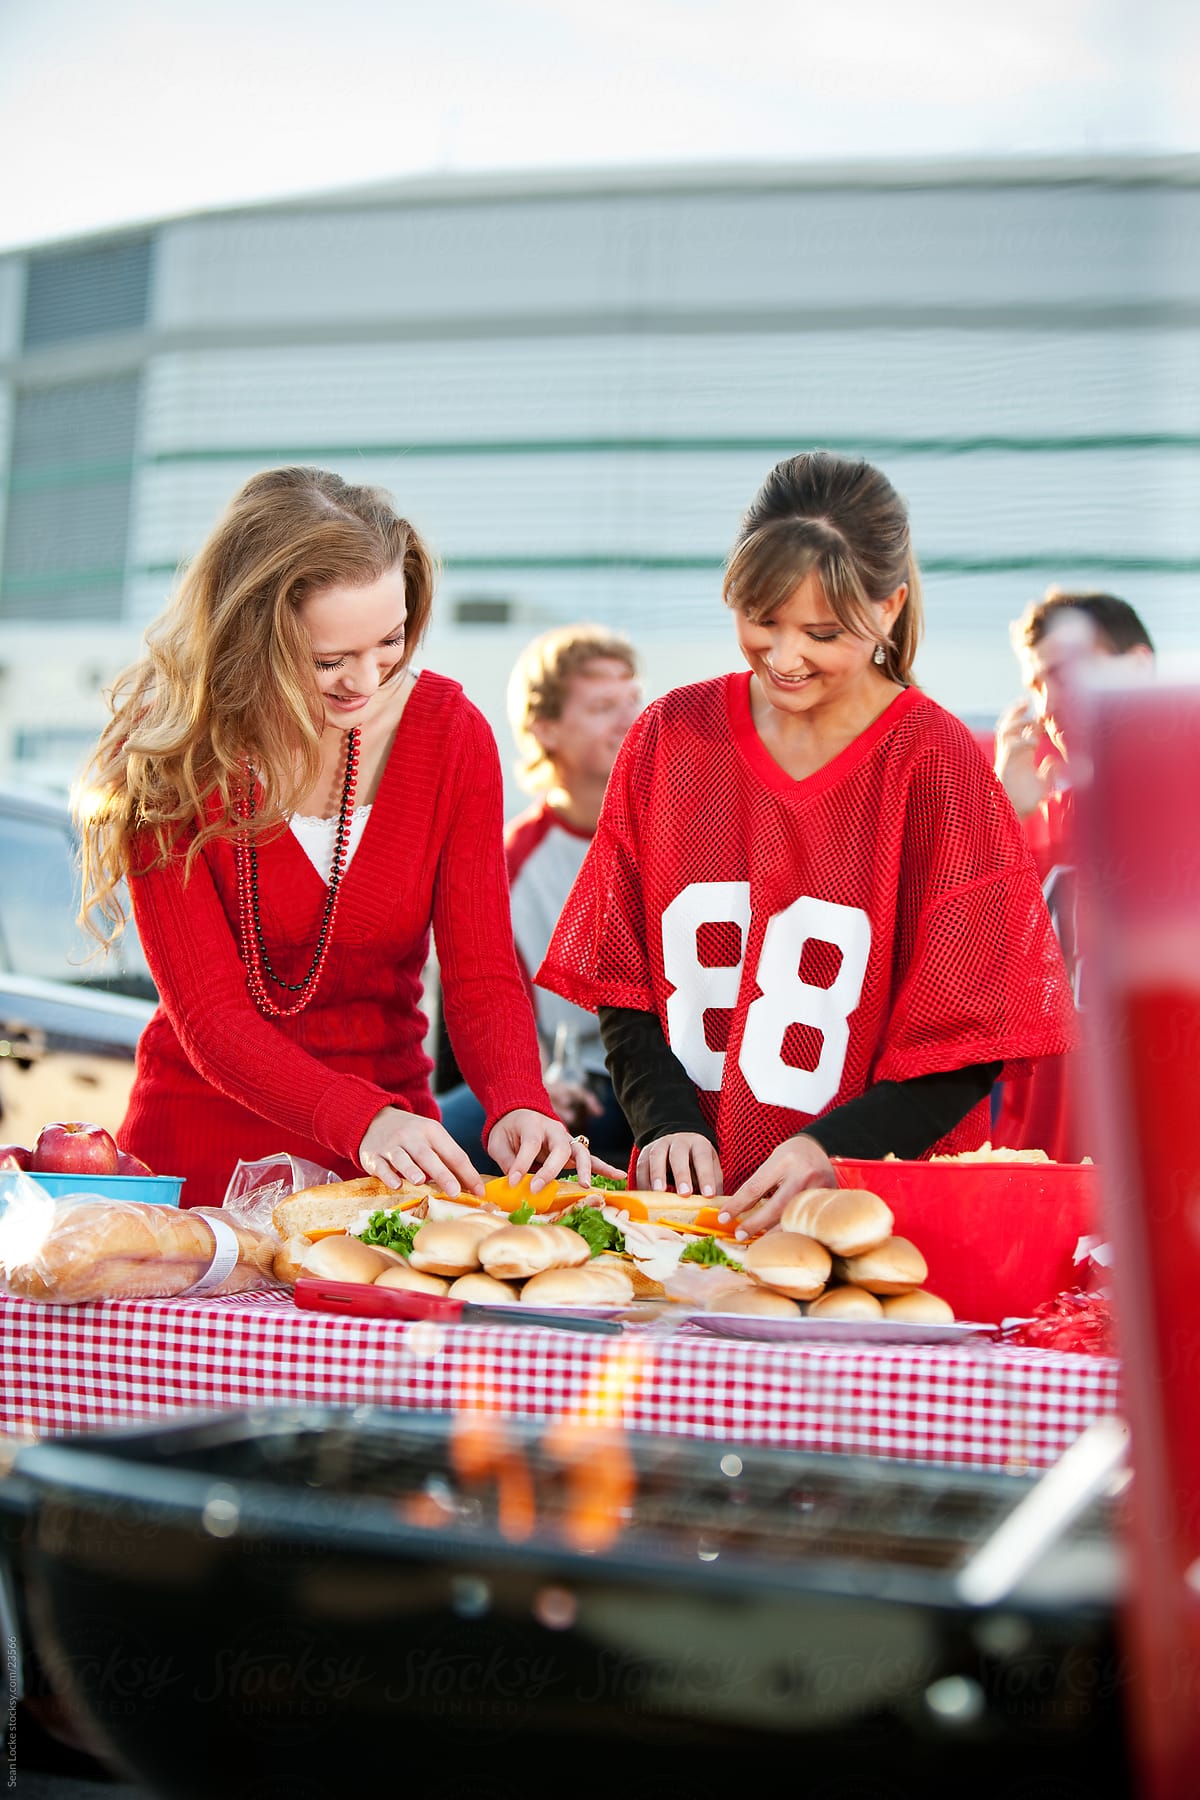 Tailgating: Women Help to Set Up Food for Party